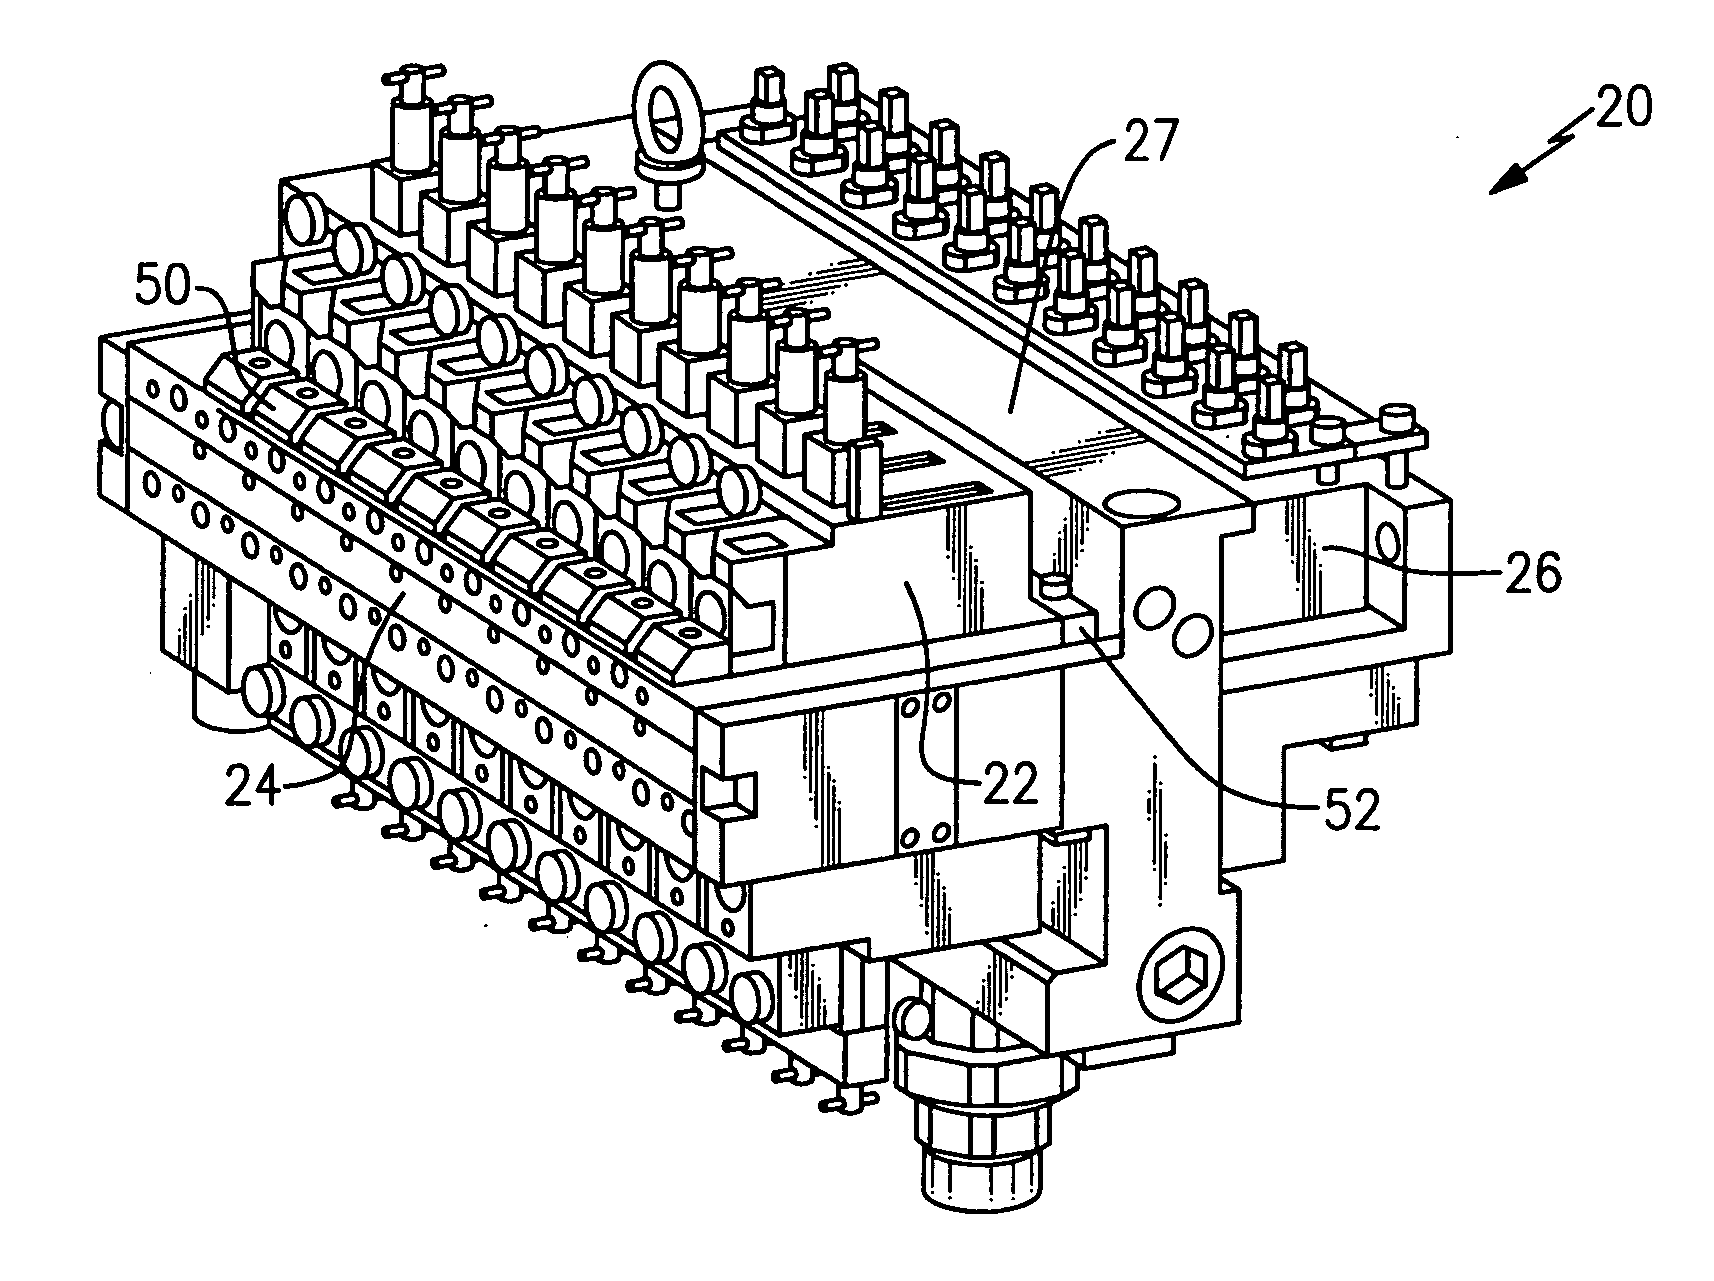 Interchangeable valve for a valve block used with a glass machine